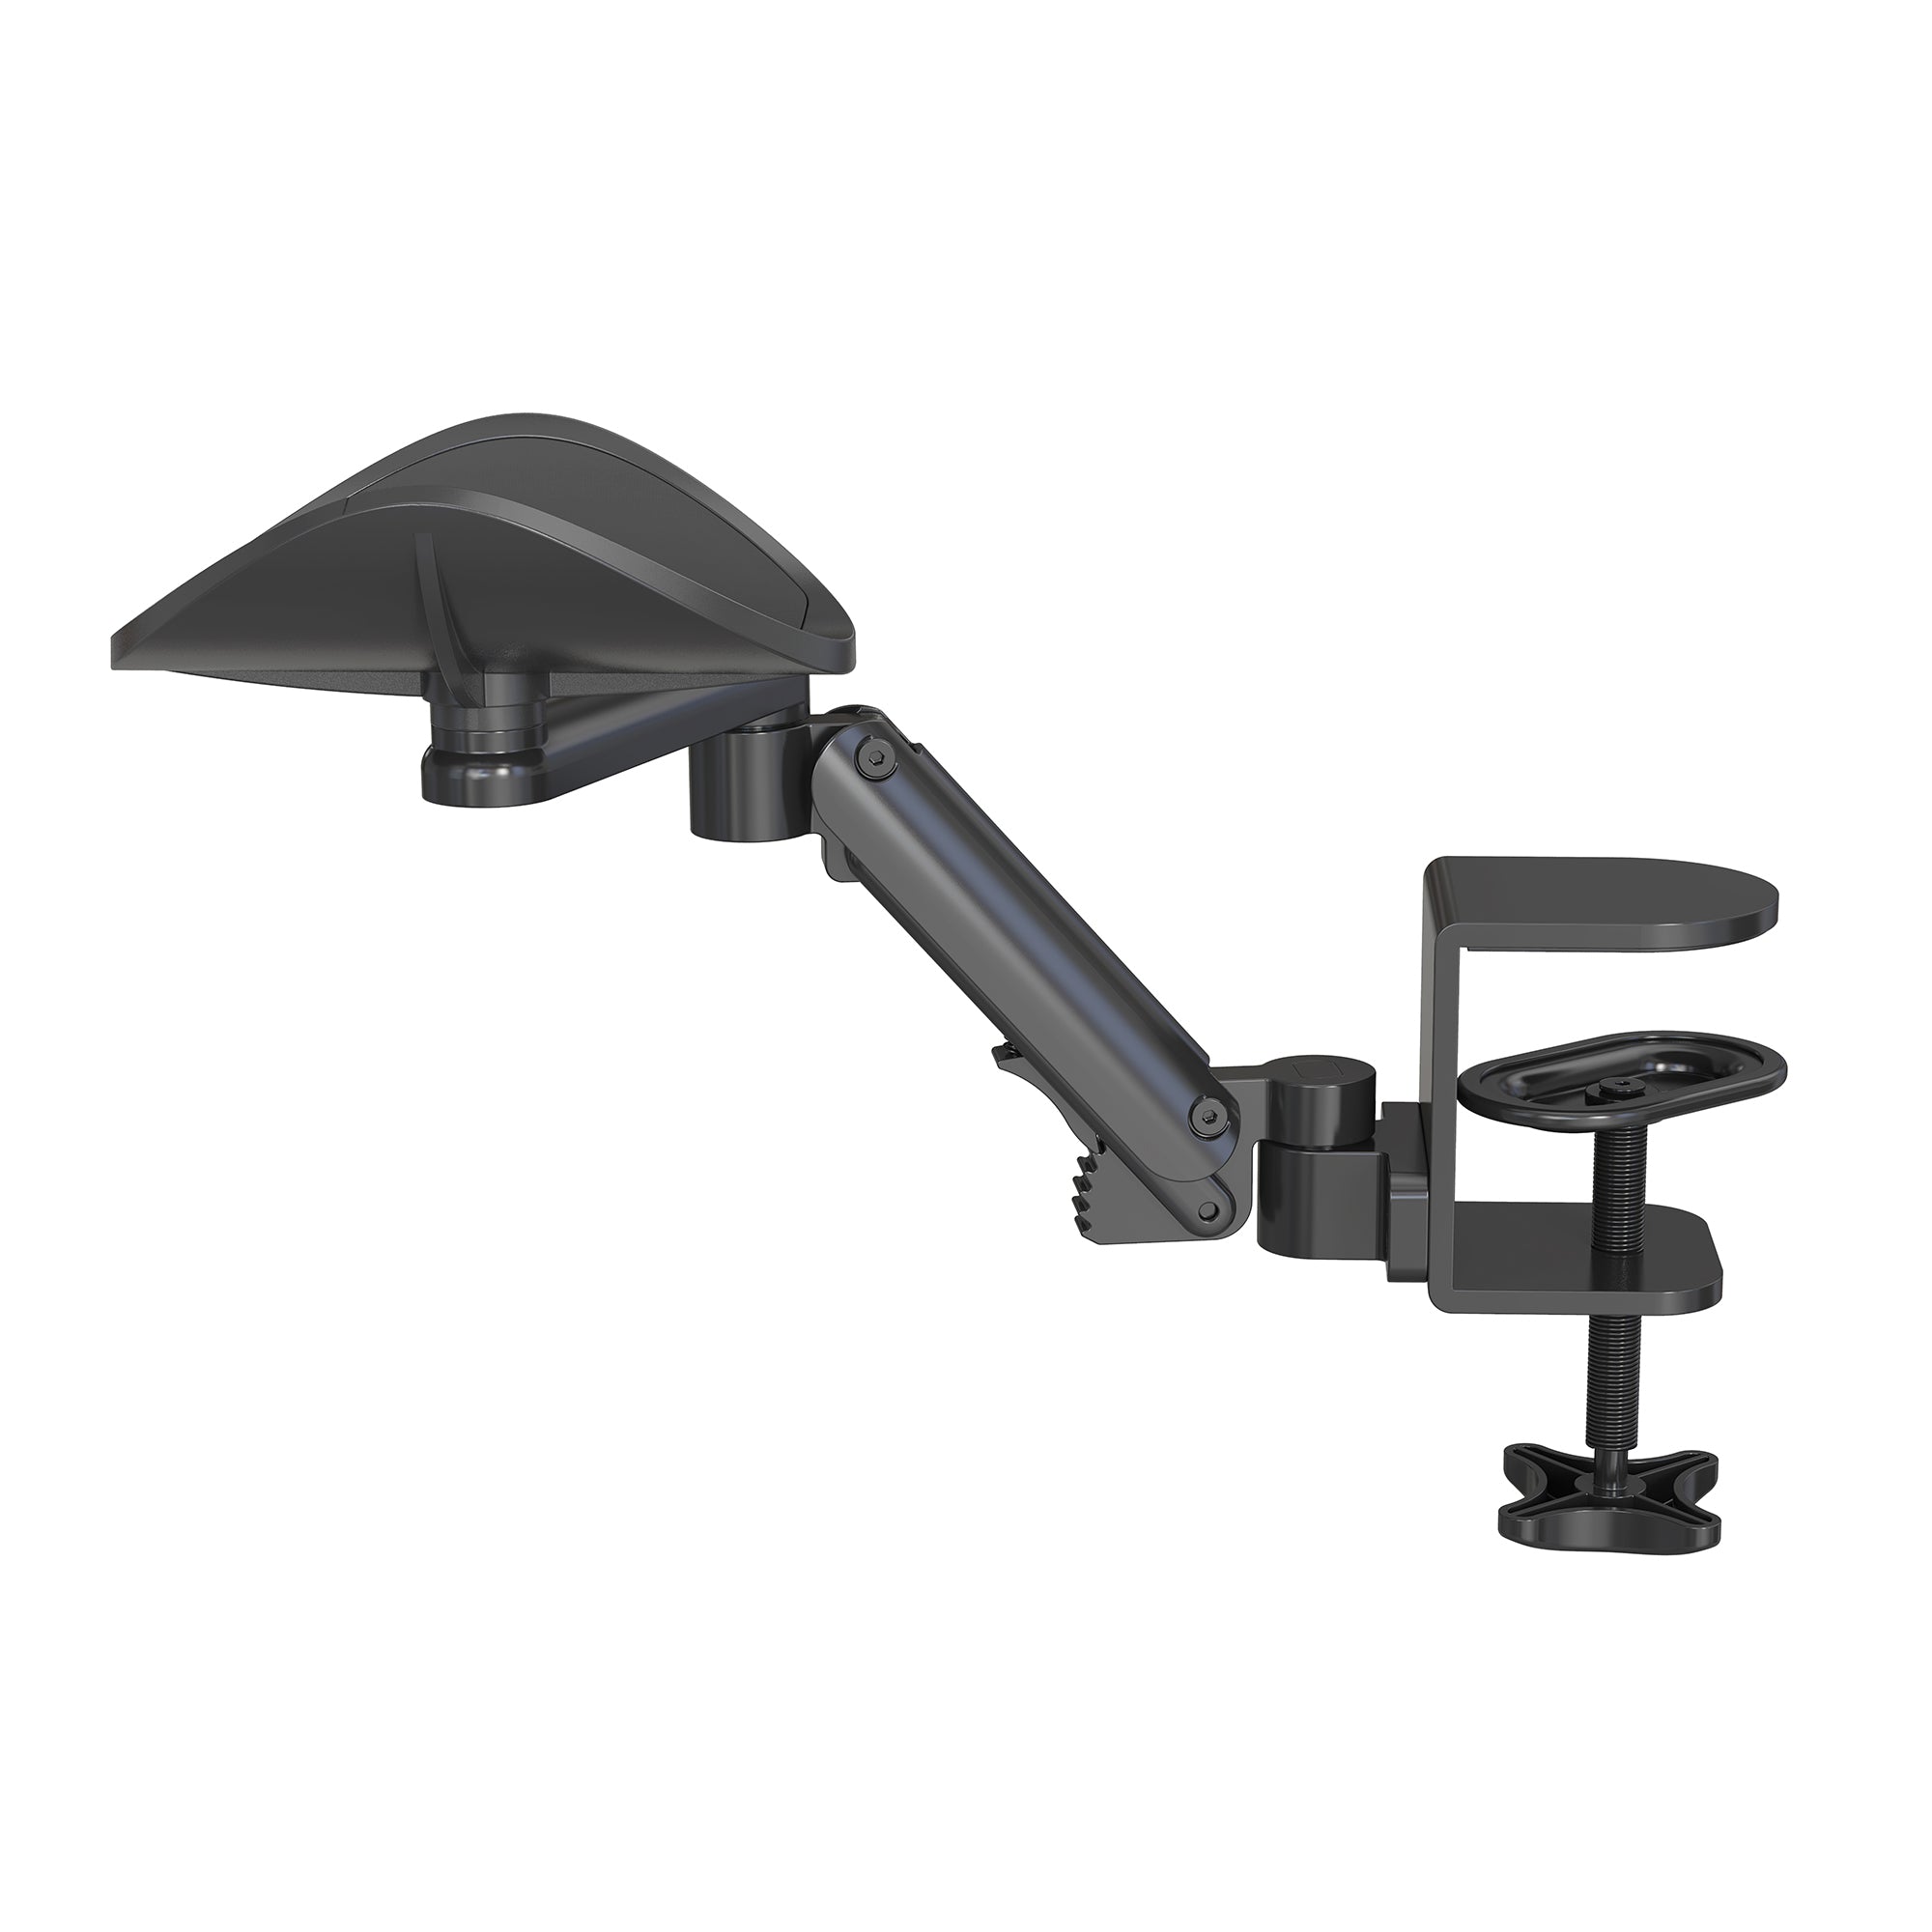 MouseMate Articulated Wrist Support